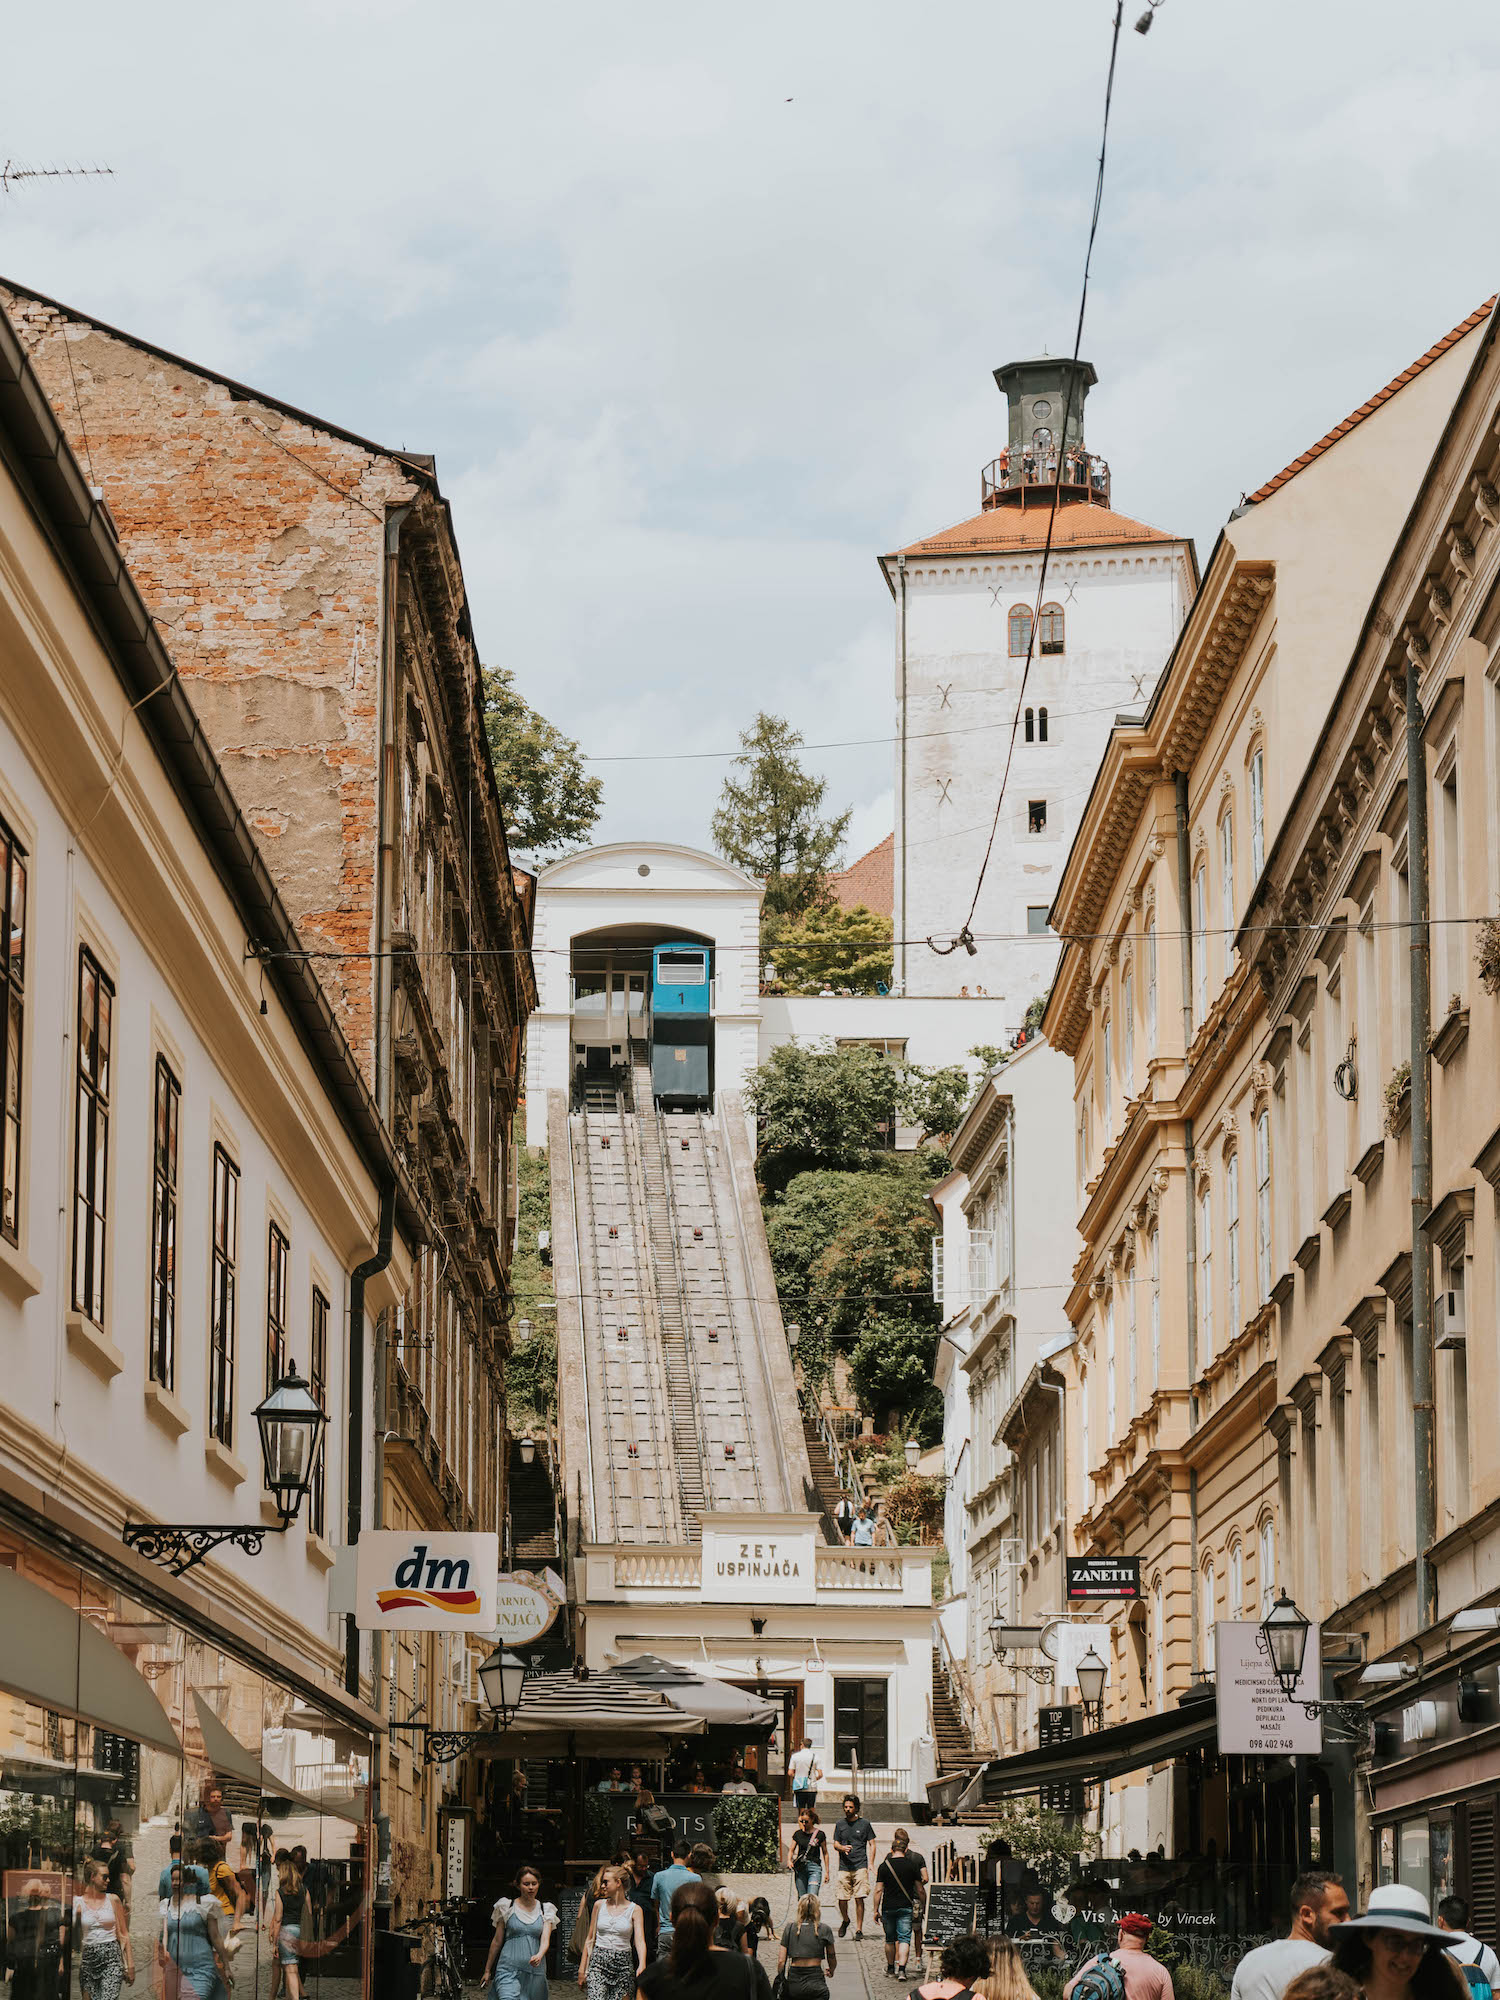 This historic funicular, one of the world’s shortest, offers panoramic views as it connects the Lower Town with the historic Upper Town in Zagreb, Croatia